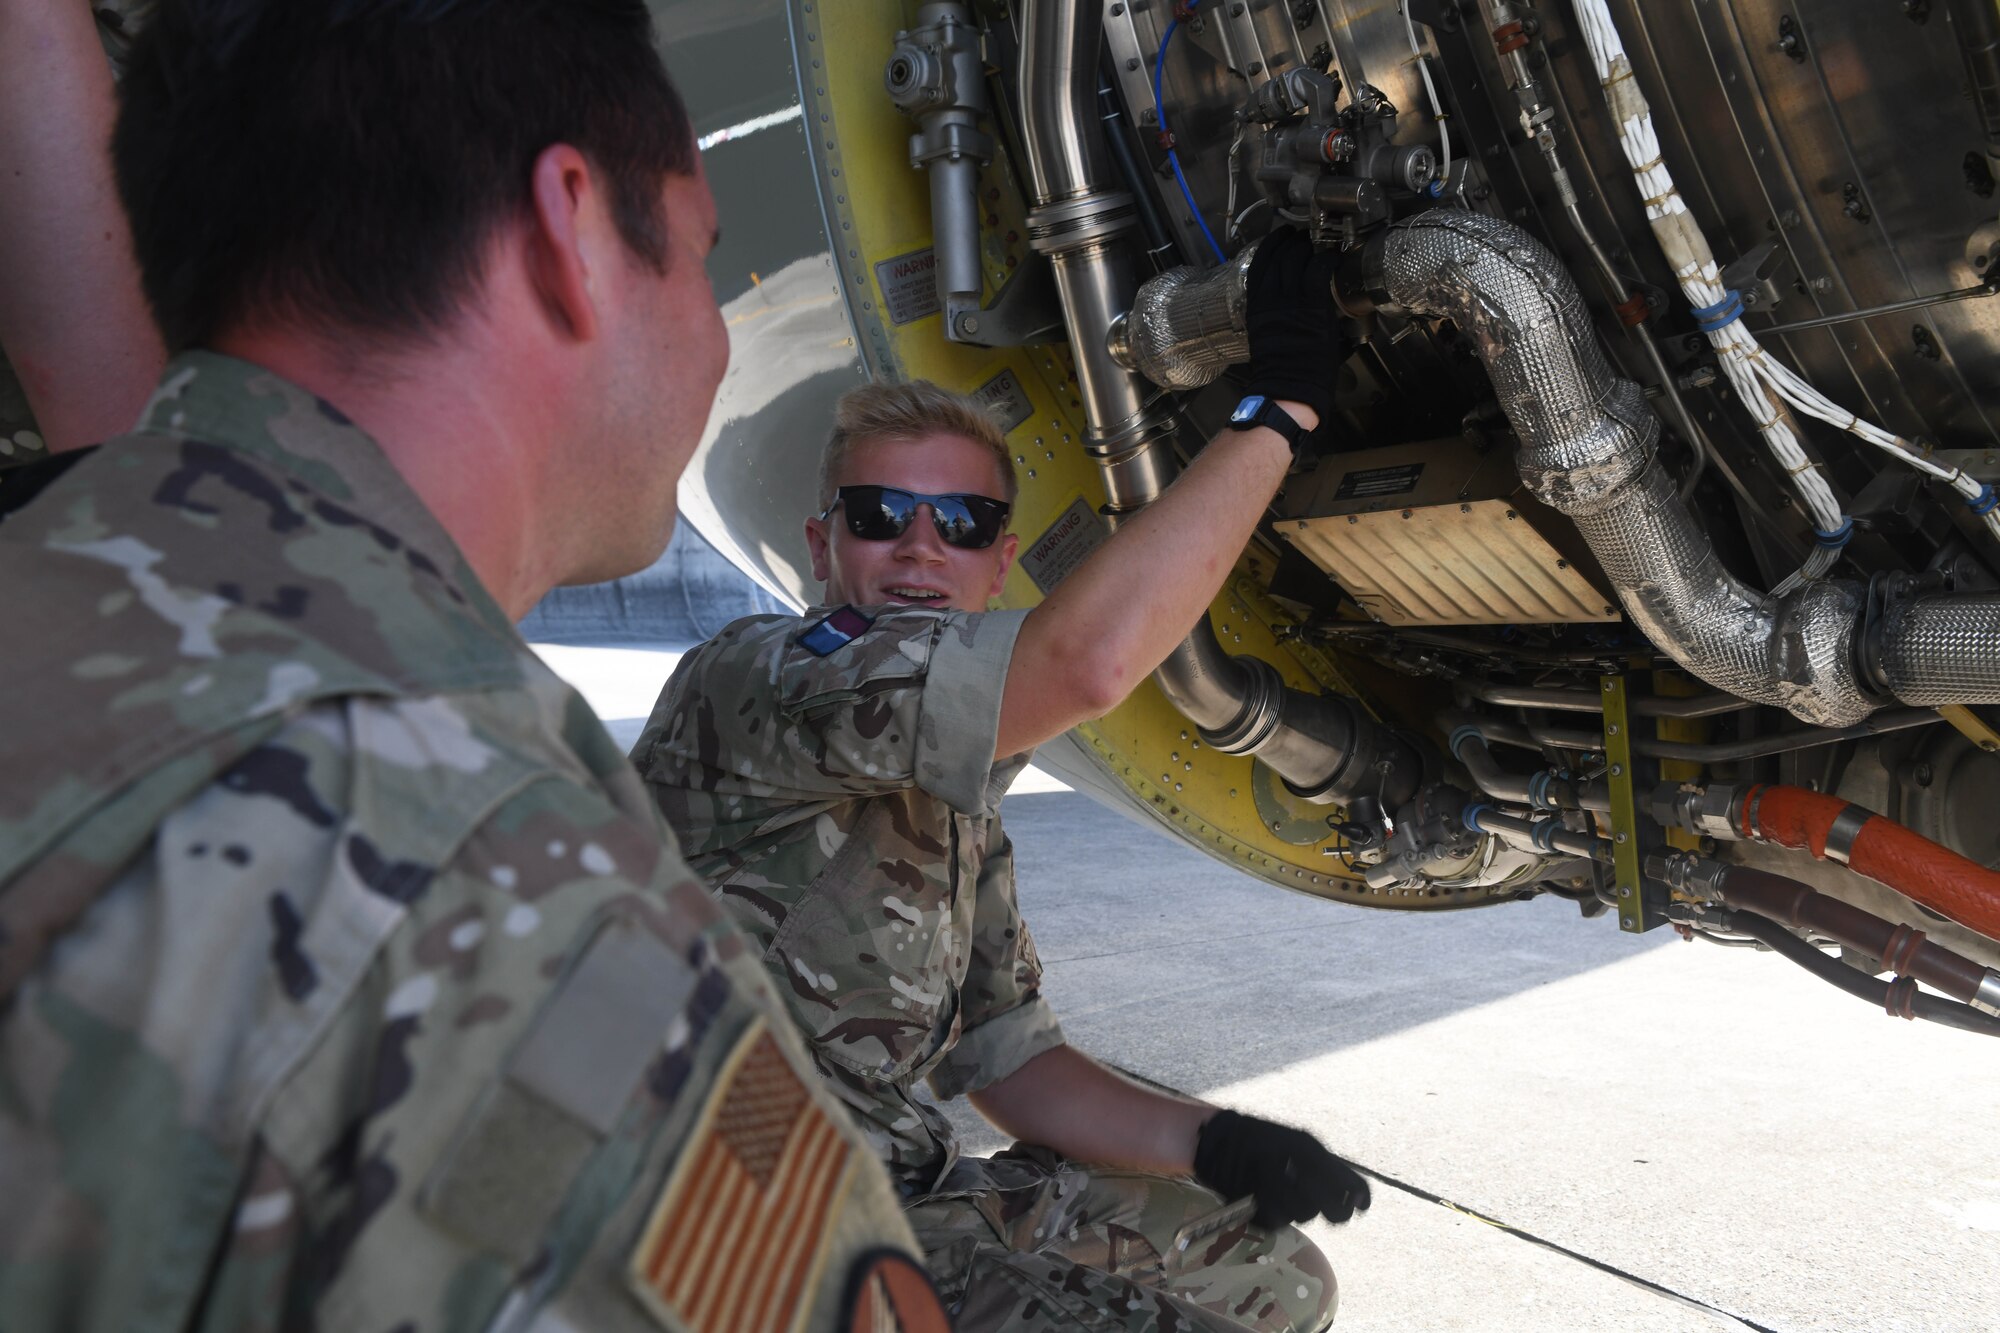 Airman and aviator work together on an aircraft.